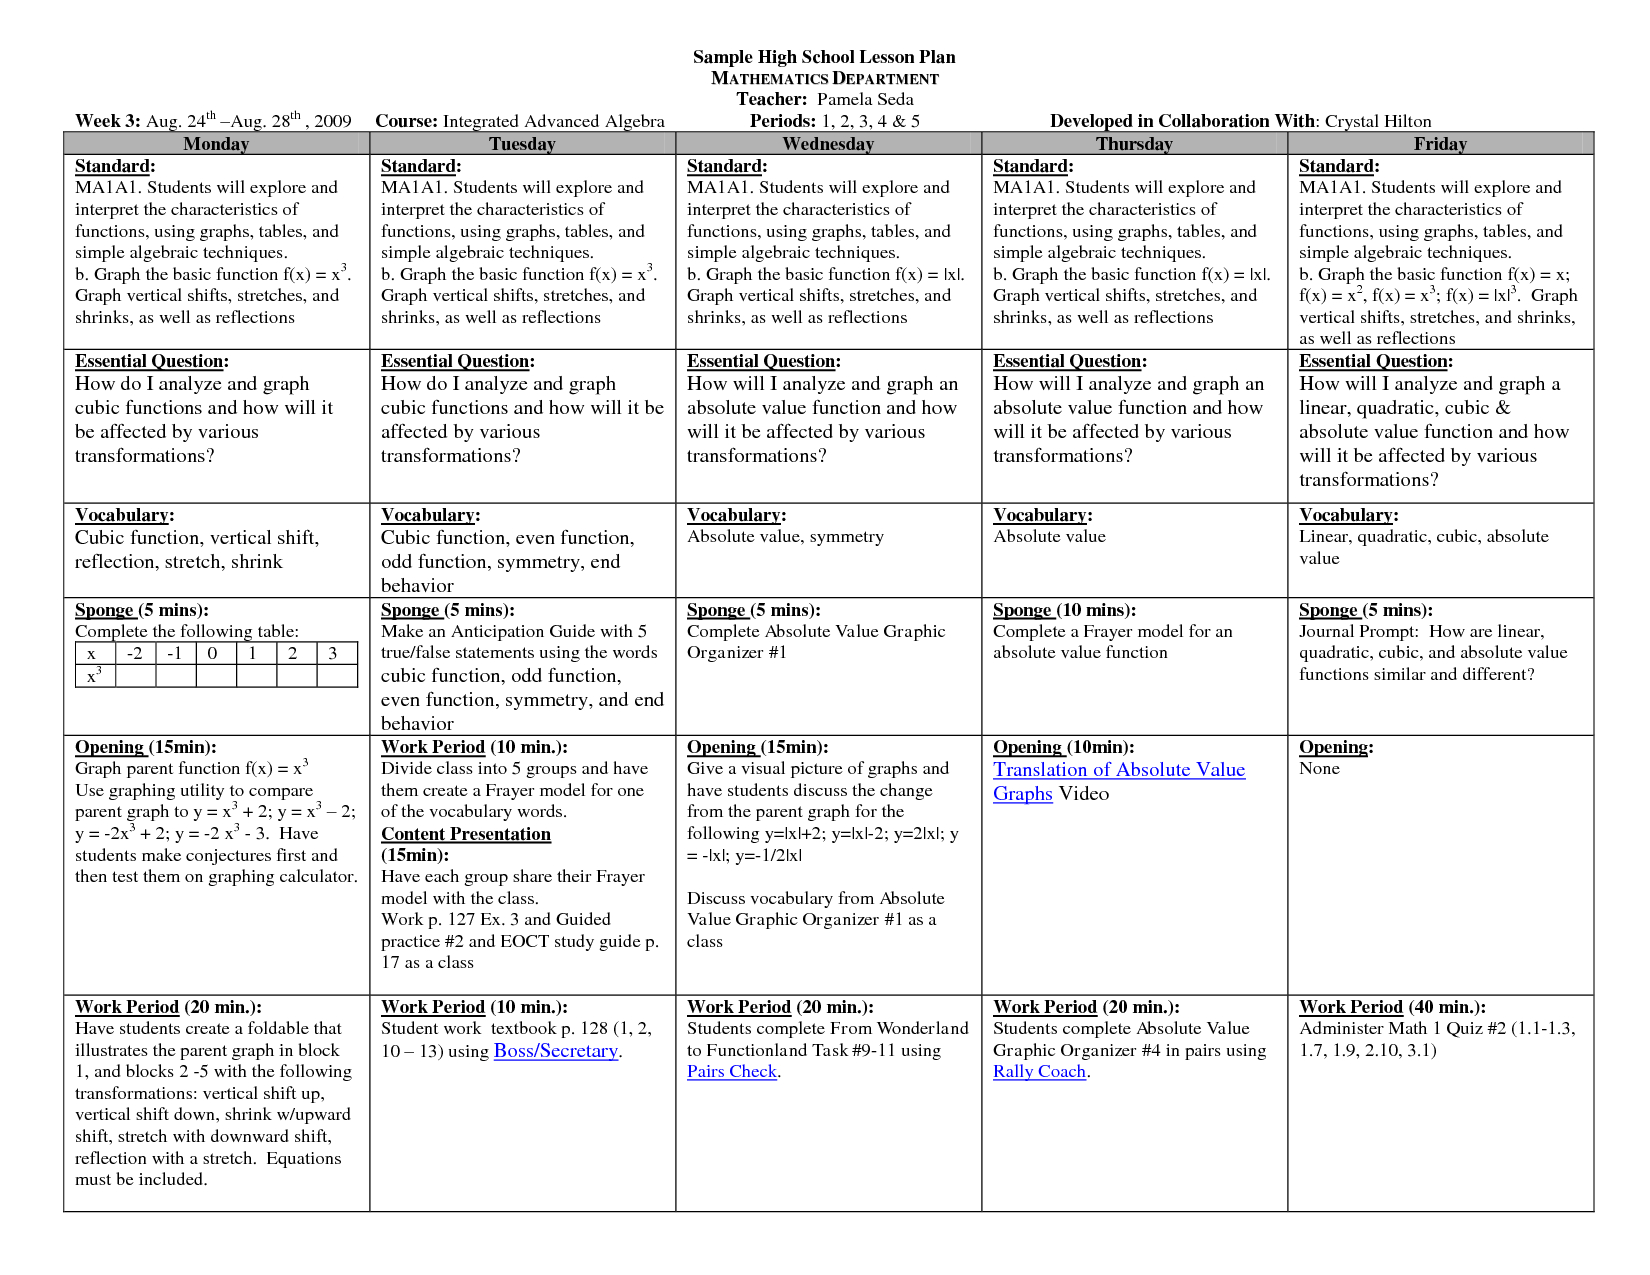 Sample Detailed Lesson Plan In Elementary Math Lesson Plans Learning